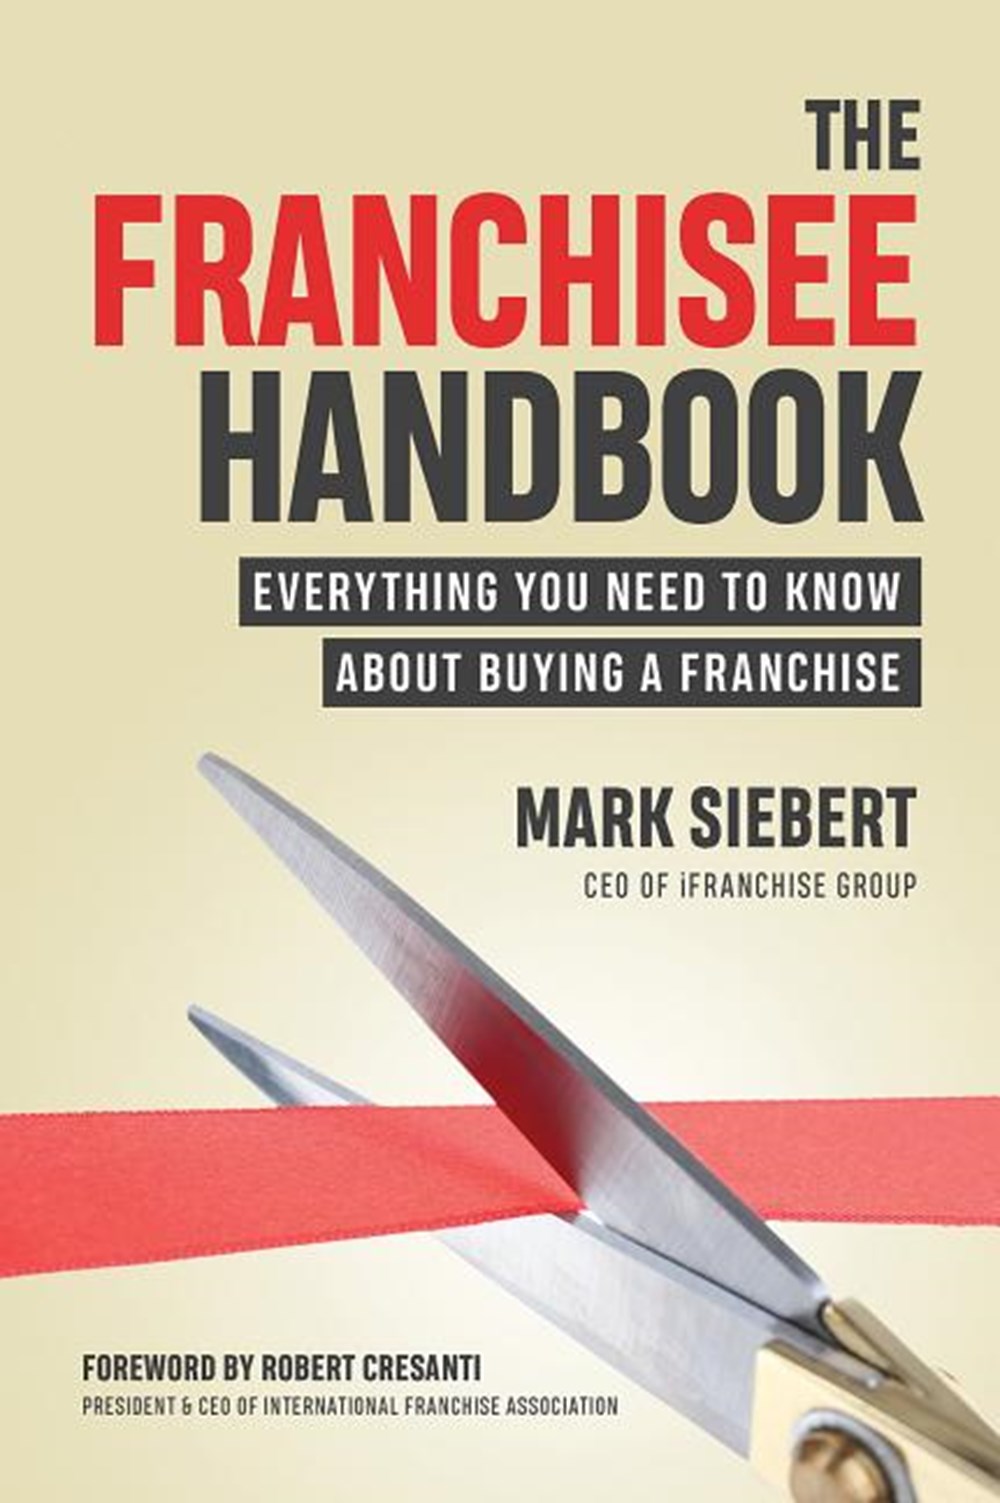 Franchisee Handbook Everything You Need to Know about Buying a Franchise